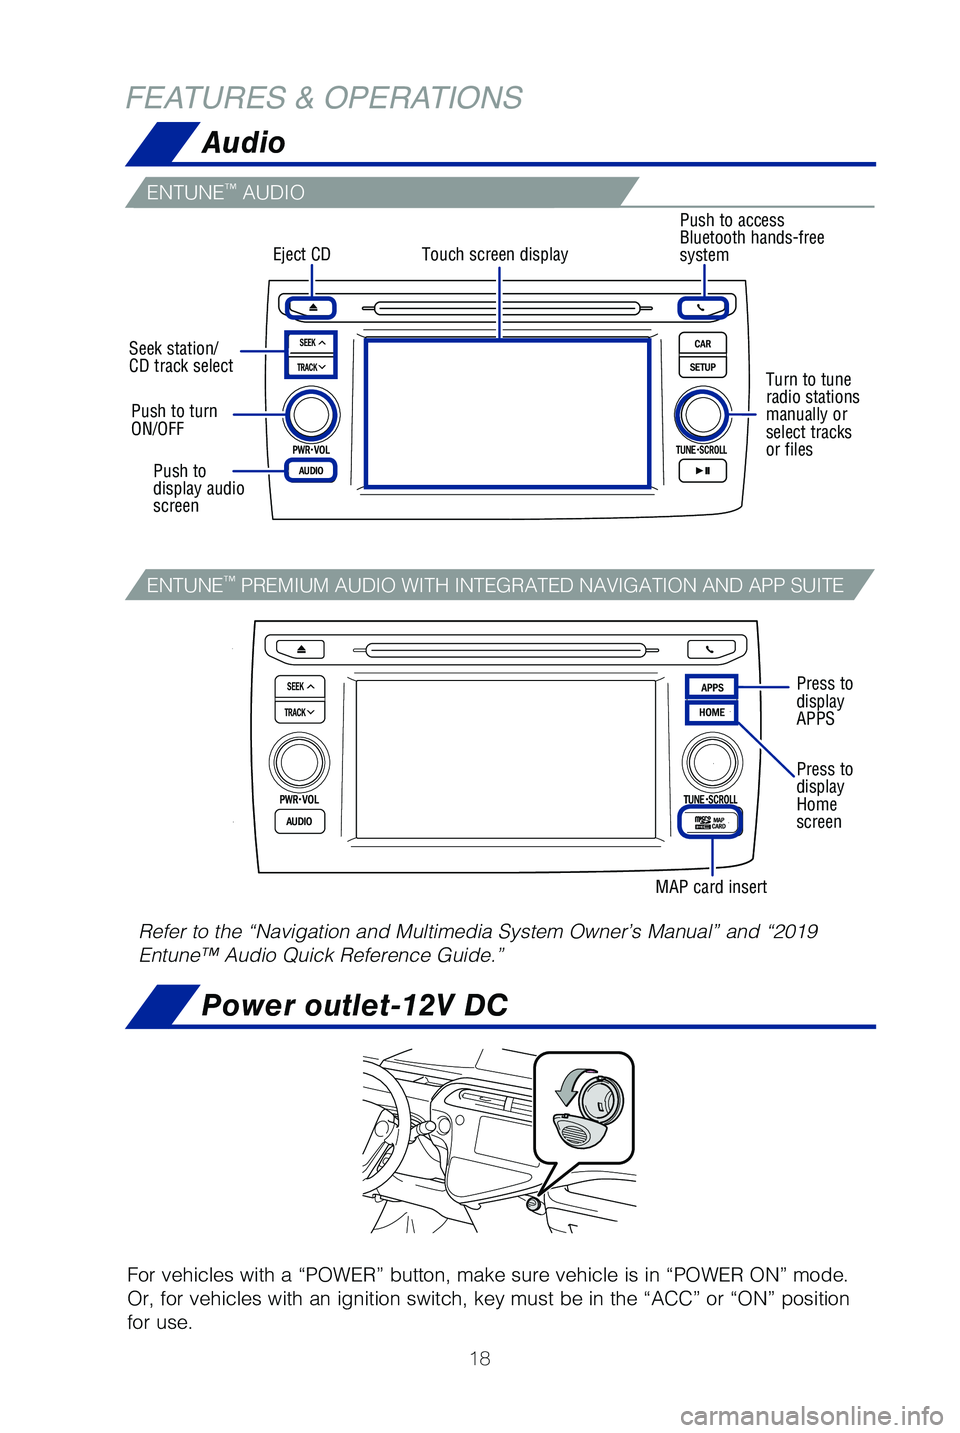 TOYOTA PRIUS C 2019  Owners Manual (in English) 18
FEATURES & OPERATIONSAudio
Power outlet-12V DC
For vehicles with a “POWER” button, make sure vehicle is in “PO\
WER ON” mode. 
Or, for vehicles with an ignition switch, key must be in the �